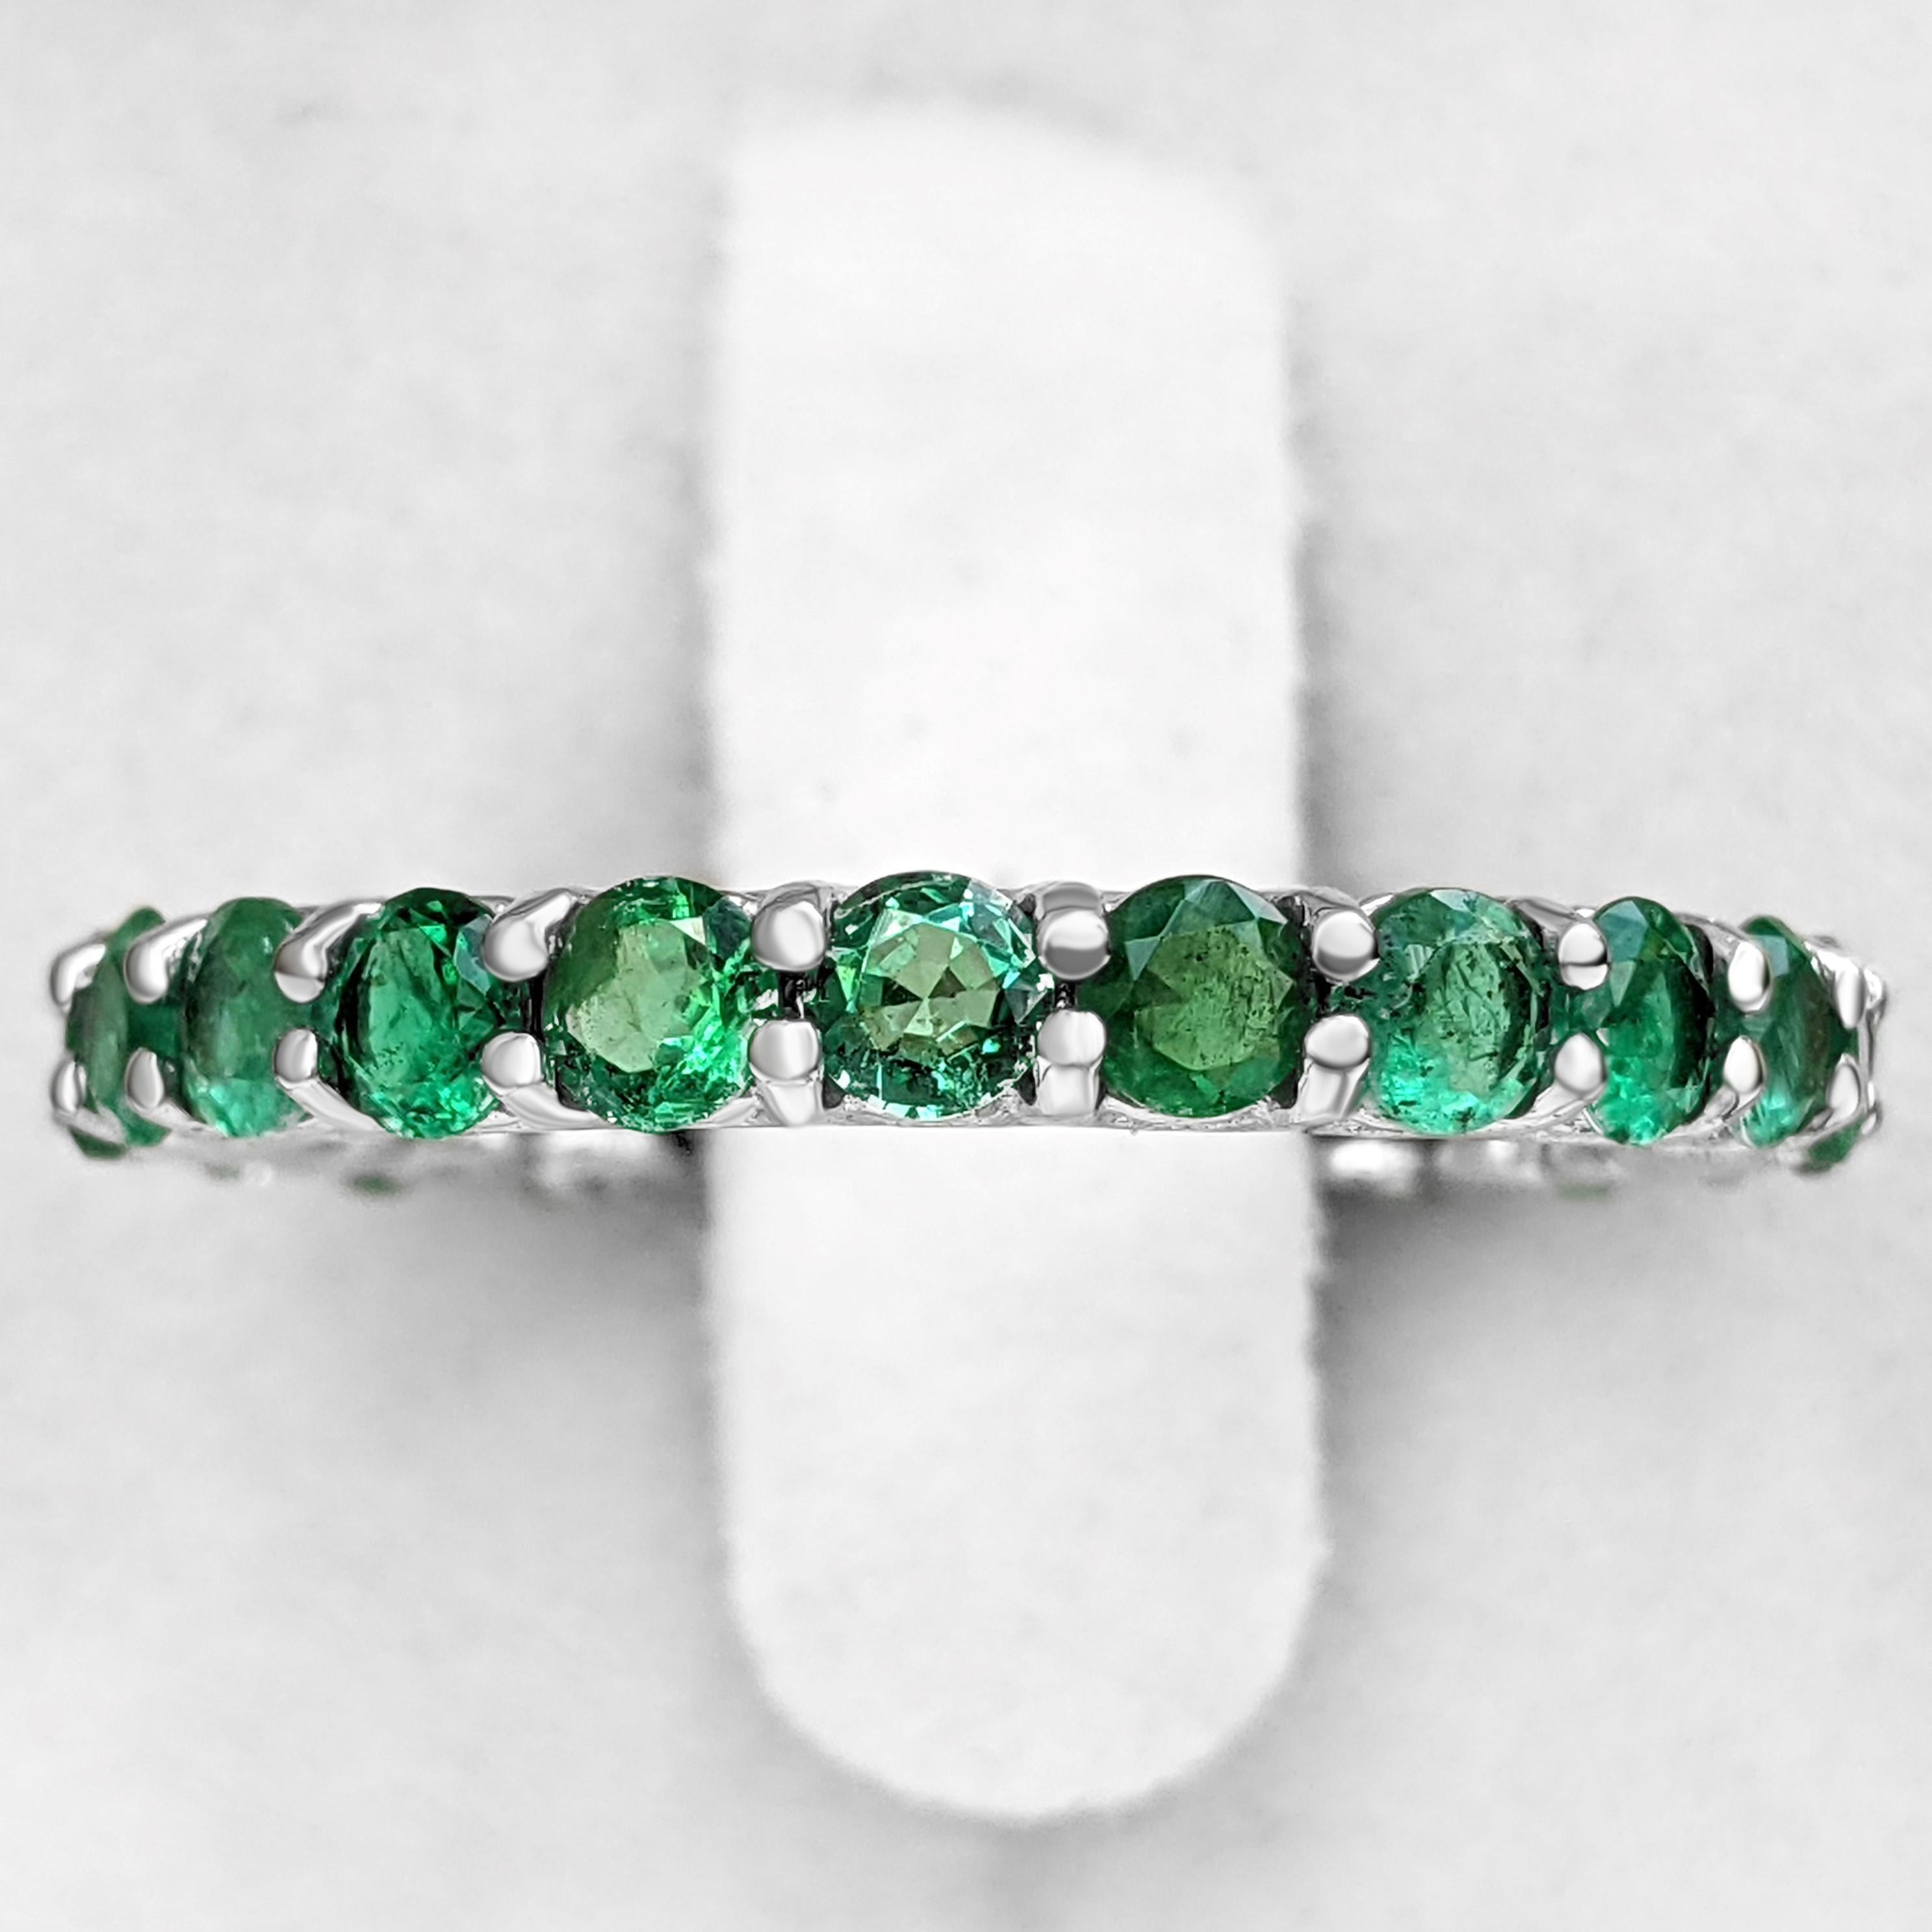 Art Deco $1 NO RESERVE! - 2.32cttw Natural Emeralds Eternity Band, 14K White Gold 